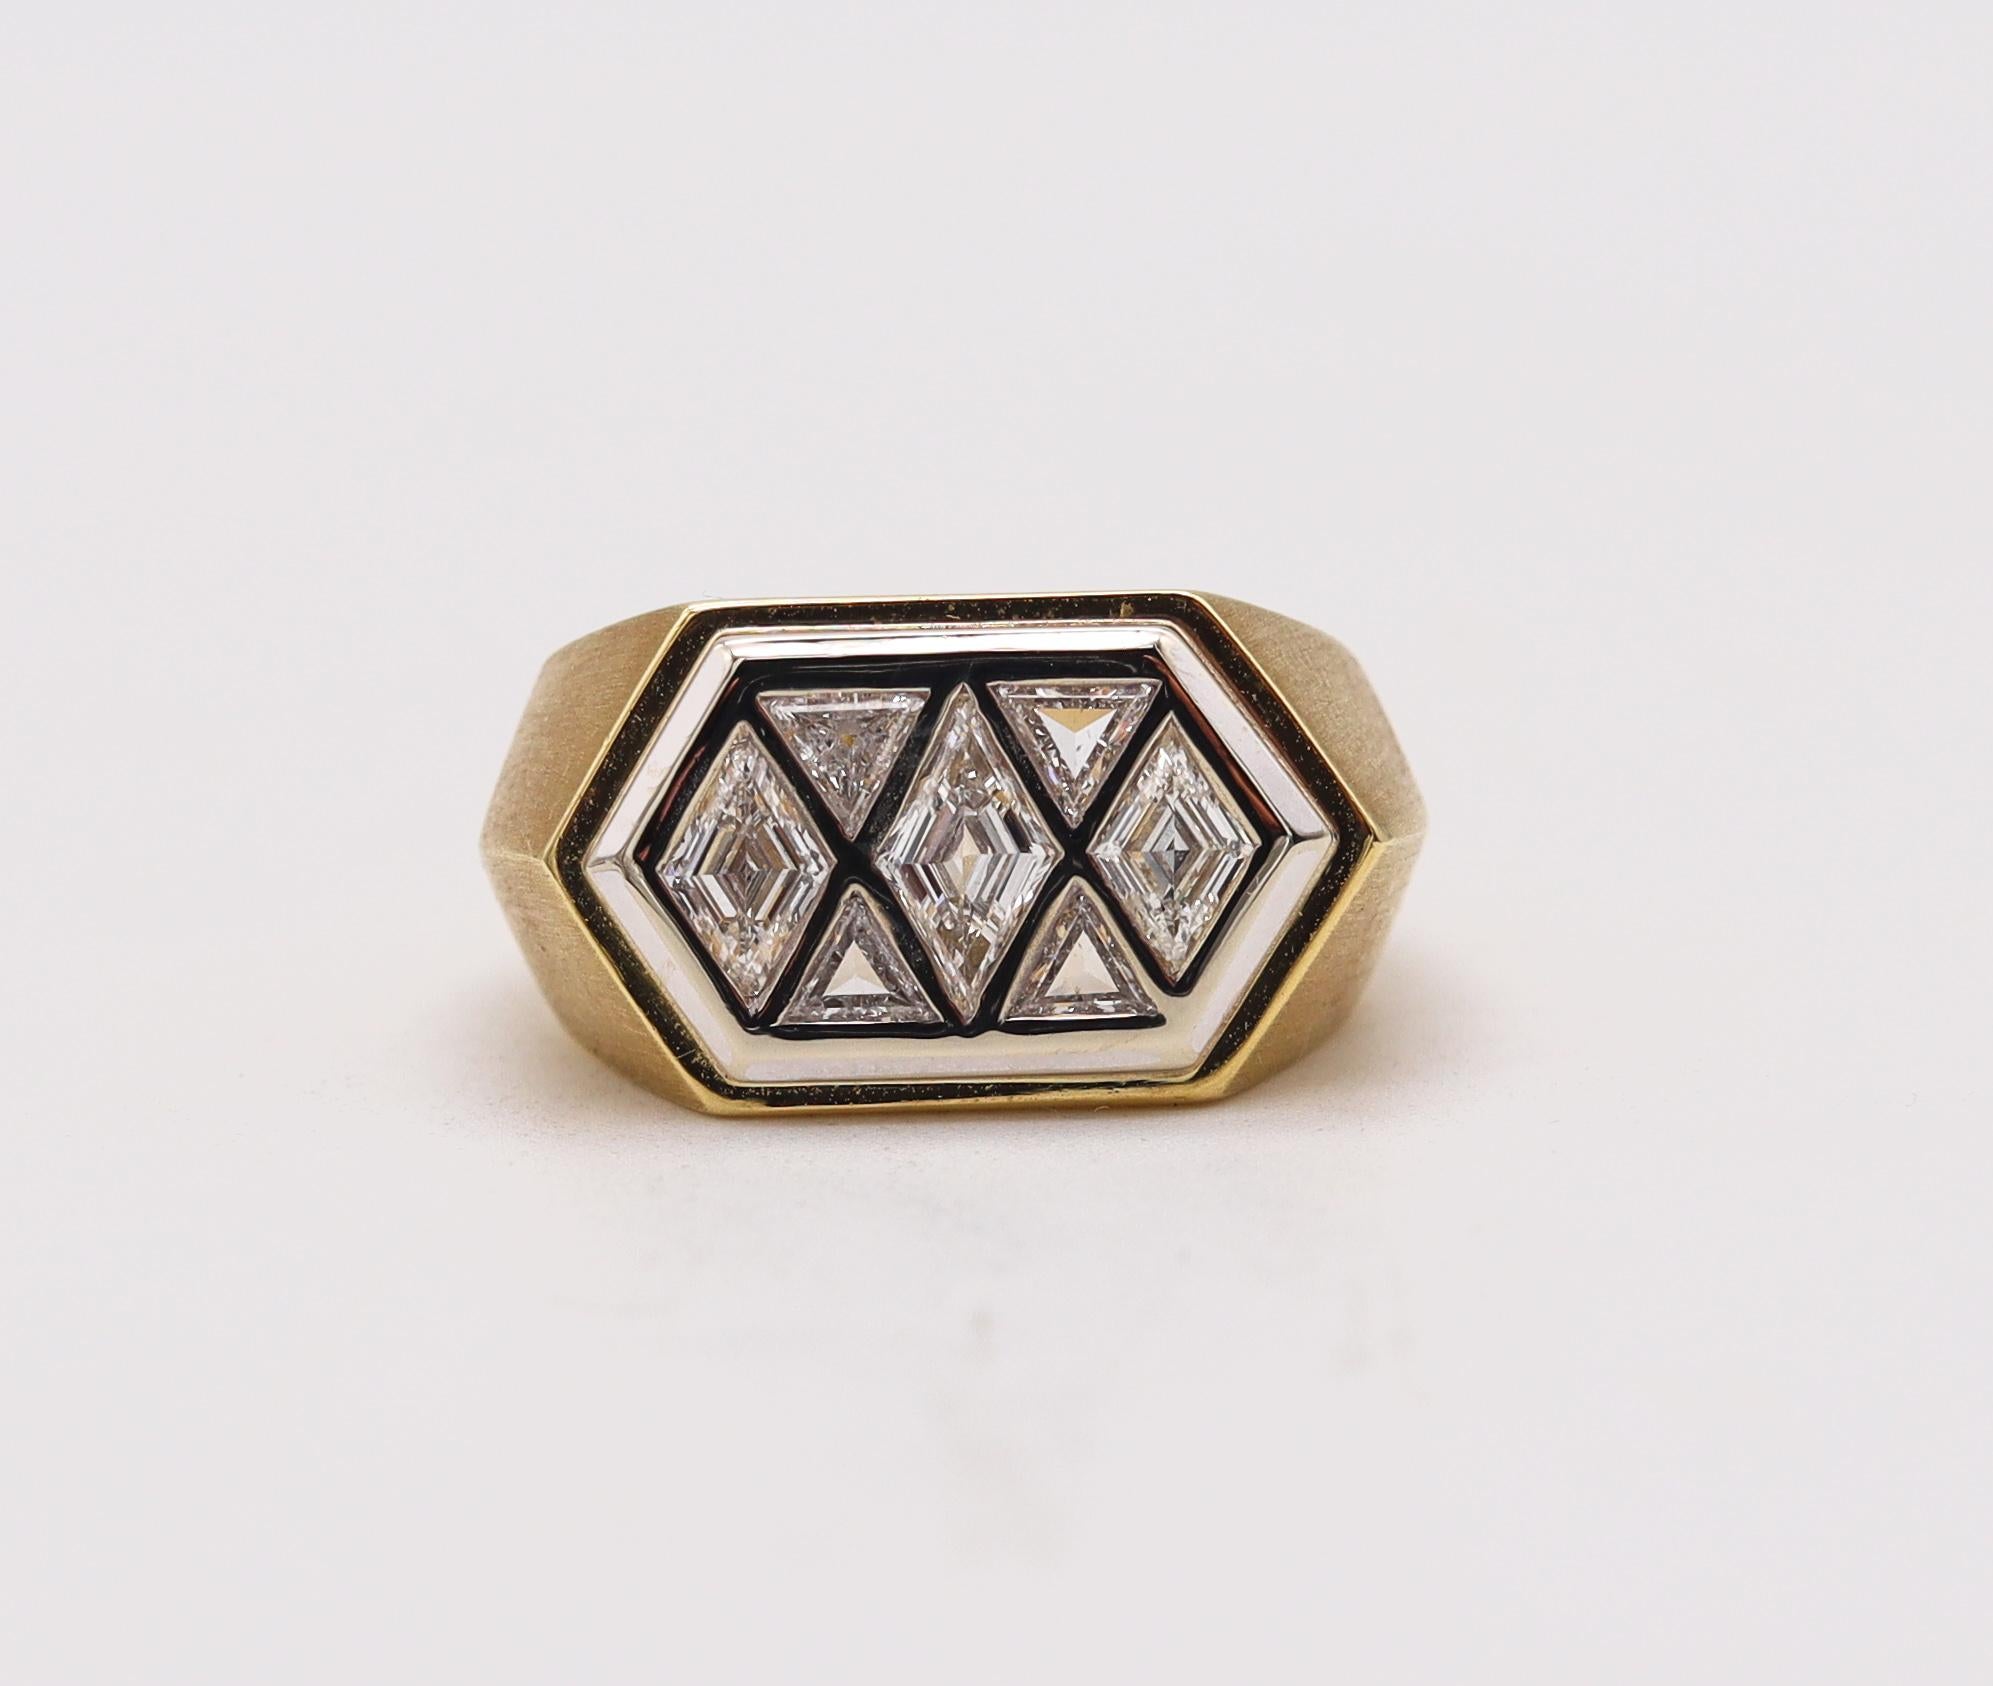 Kite Cut Gem set Geometric Signet Ring In 18Kt Gold And Platinum With 2.82 Ctw Diamonds